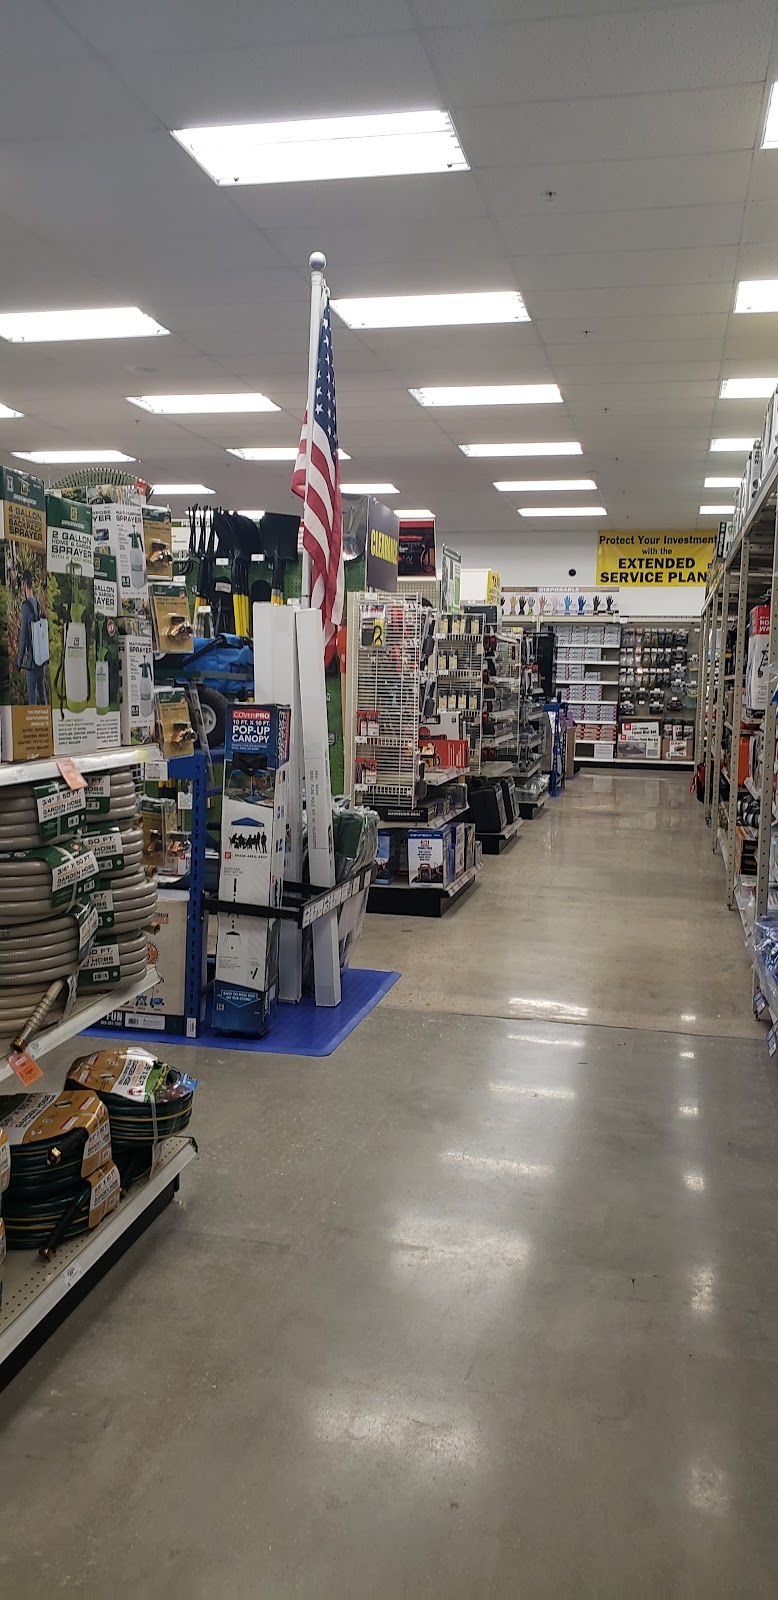 Harbor Freight Tools | 1606 S Governors Ave, Dover, DE 19904 | Phone: (302) 736-6795